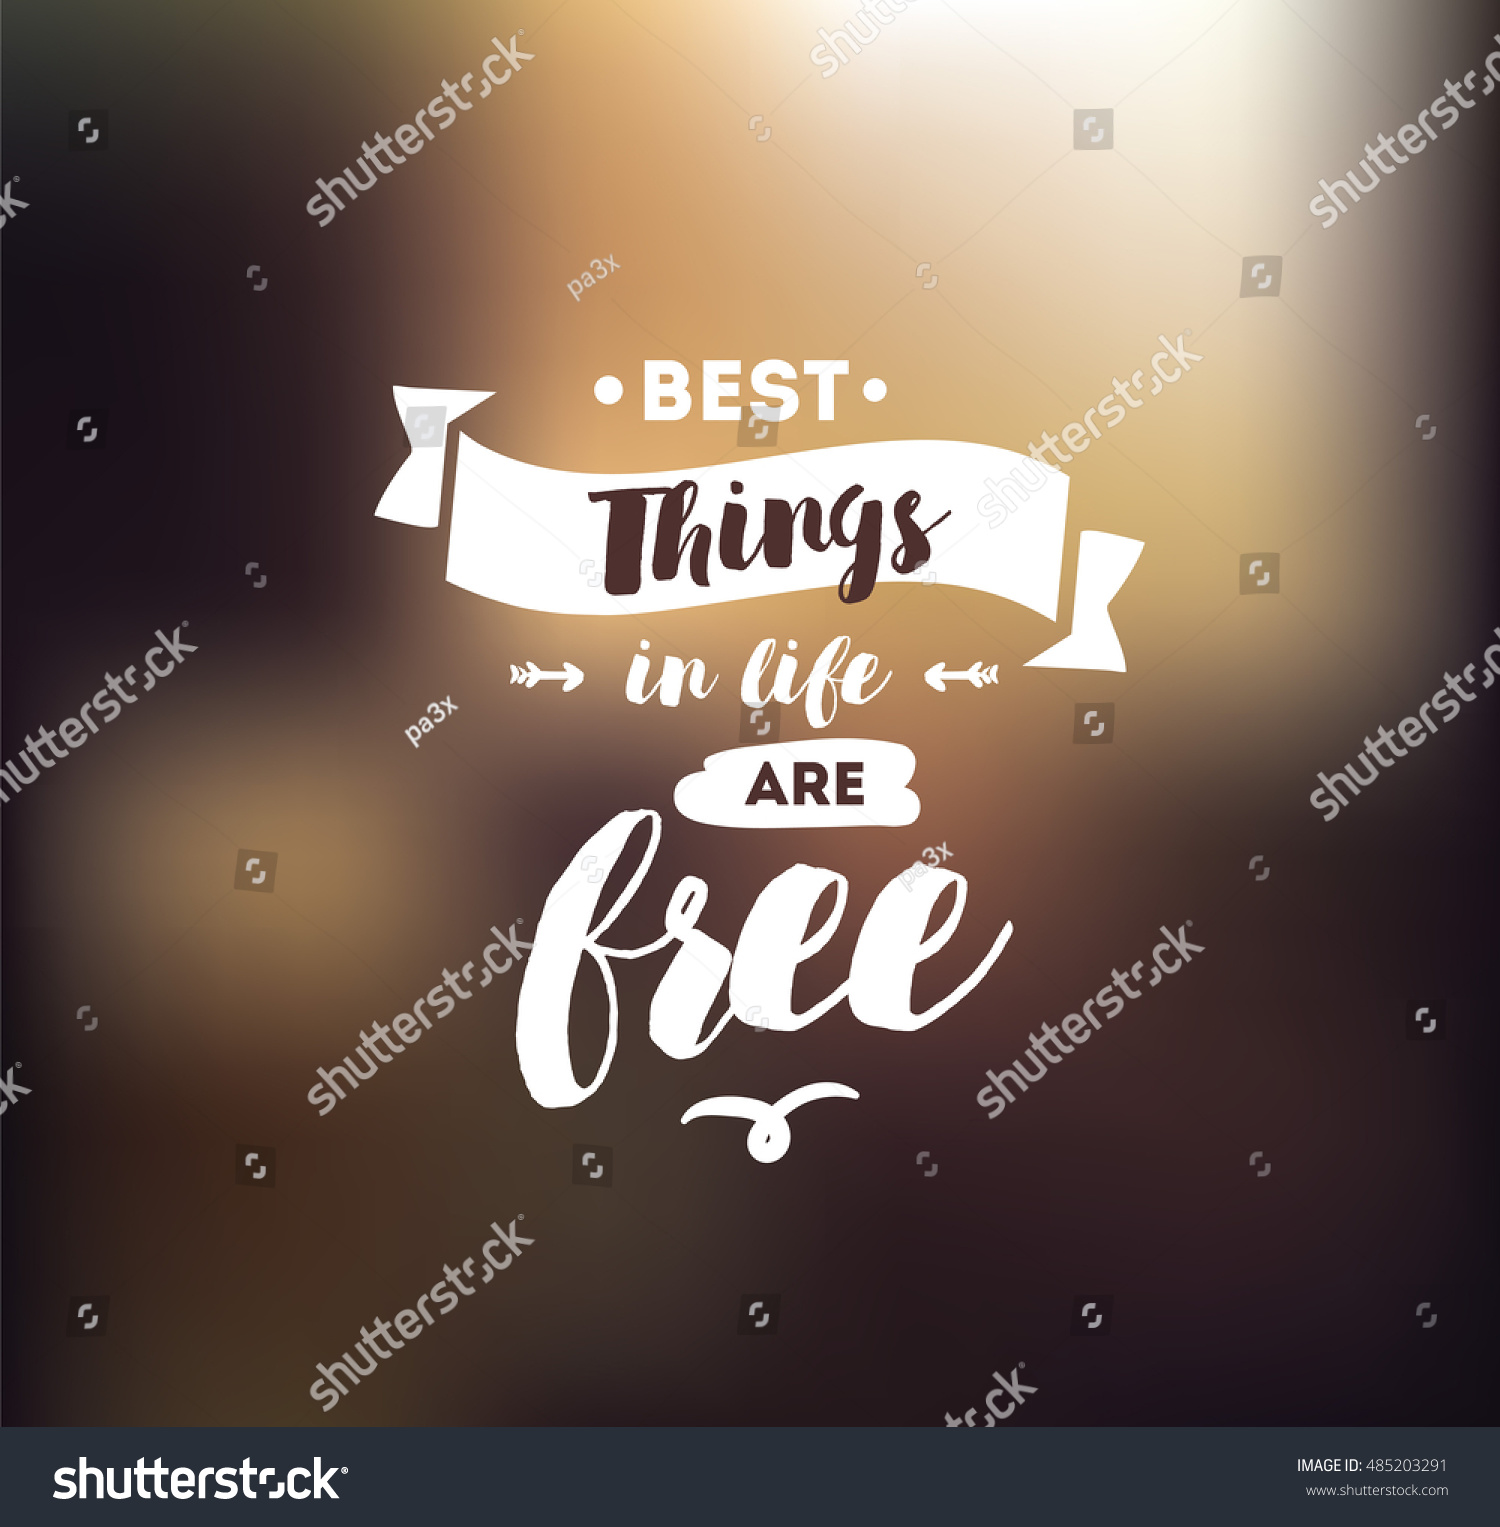 Best things in life are free Inspirational quote motivation Typography for poster